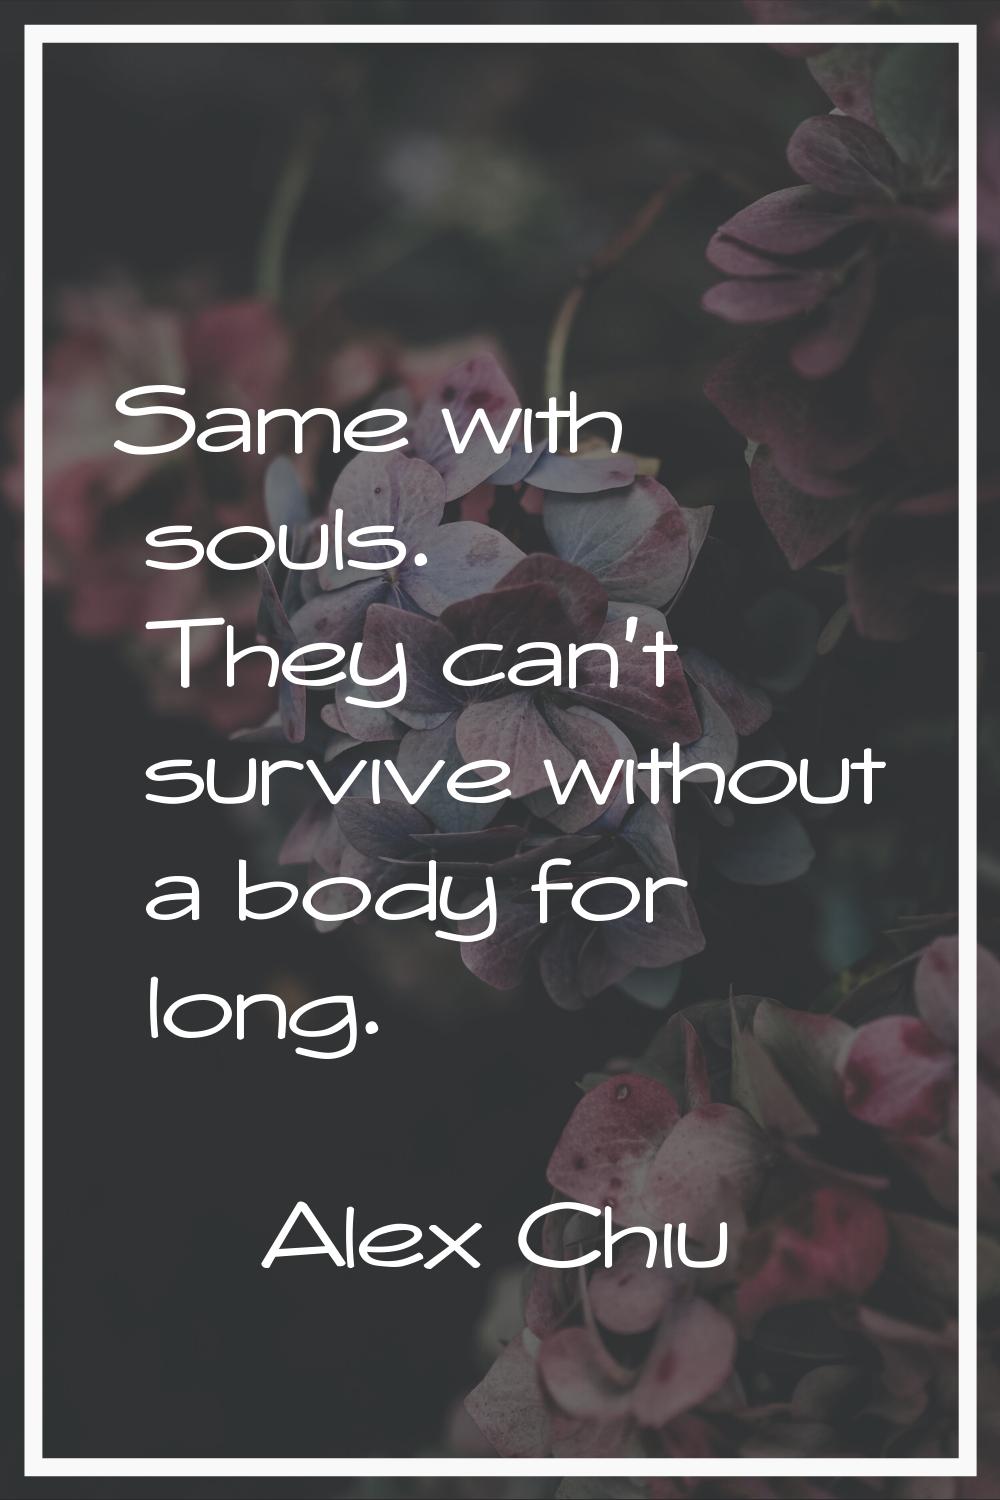 Same with souls. They can't survive without a body for long.